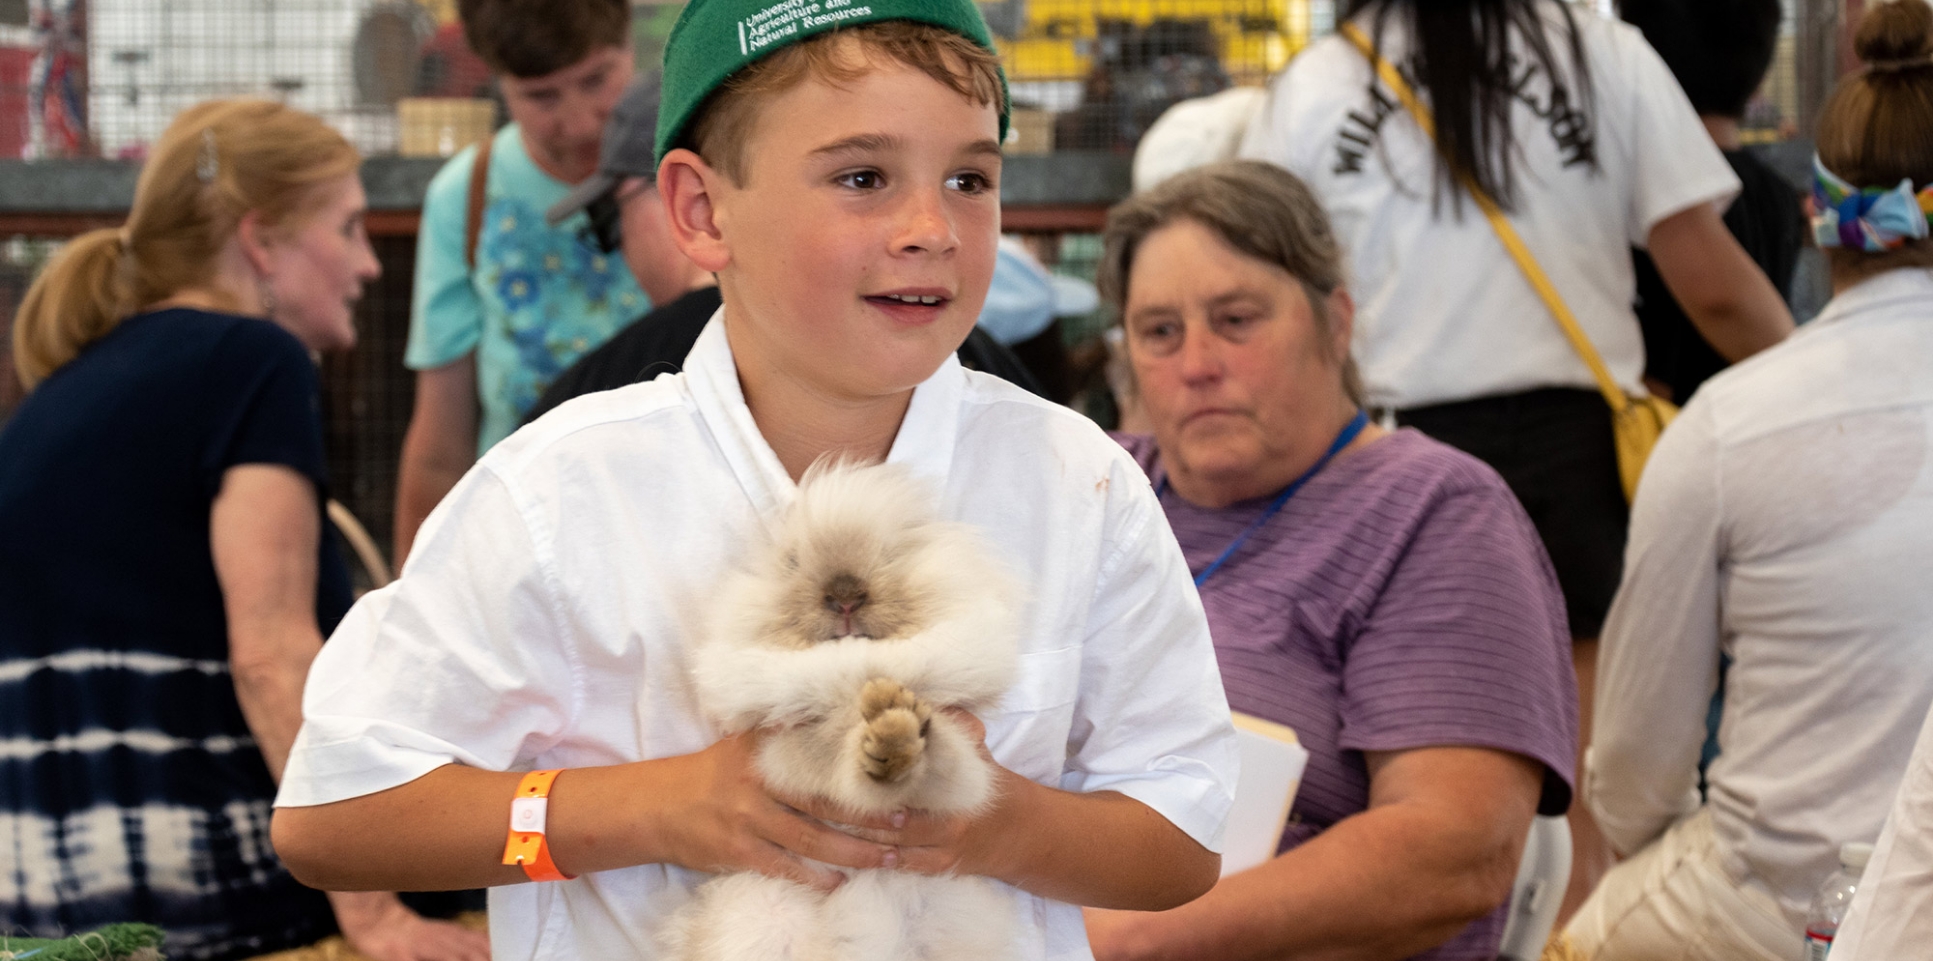 little boy with a green hat holding a bunny for livestock